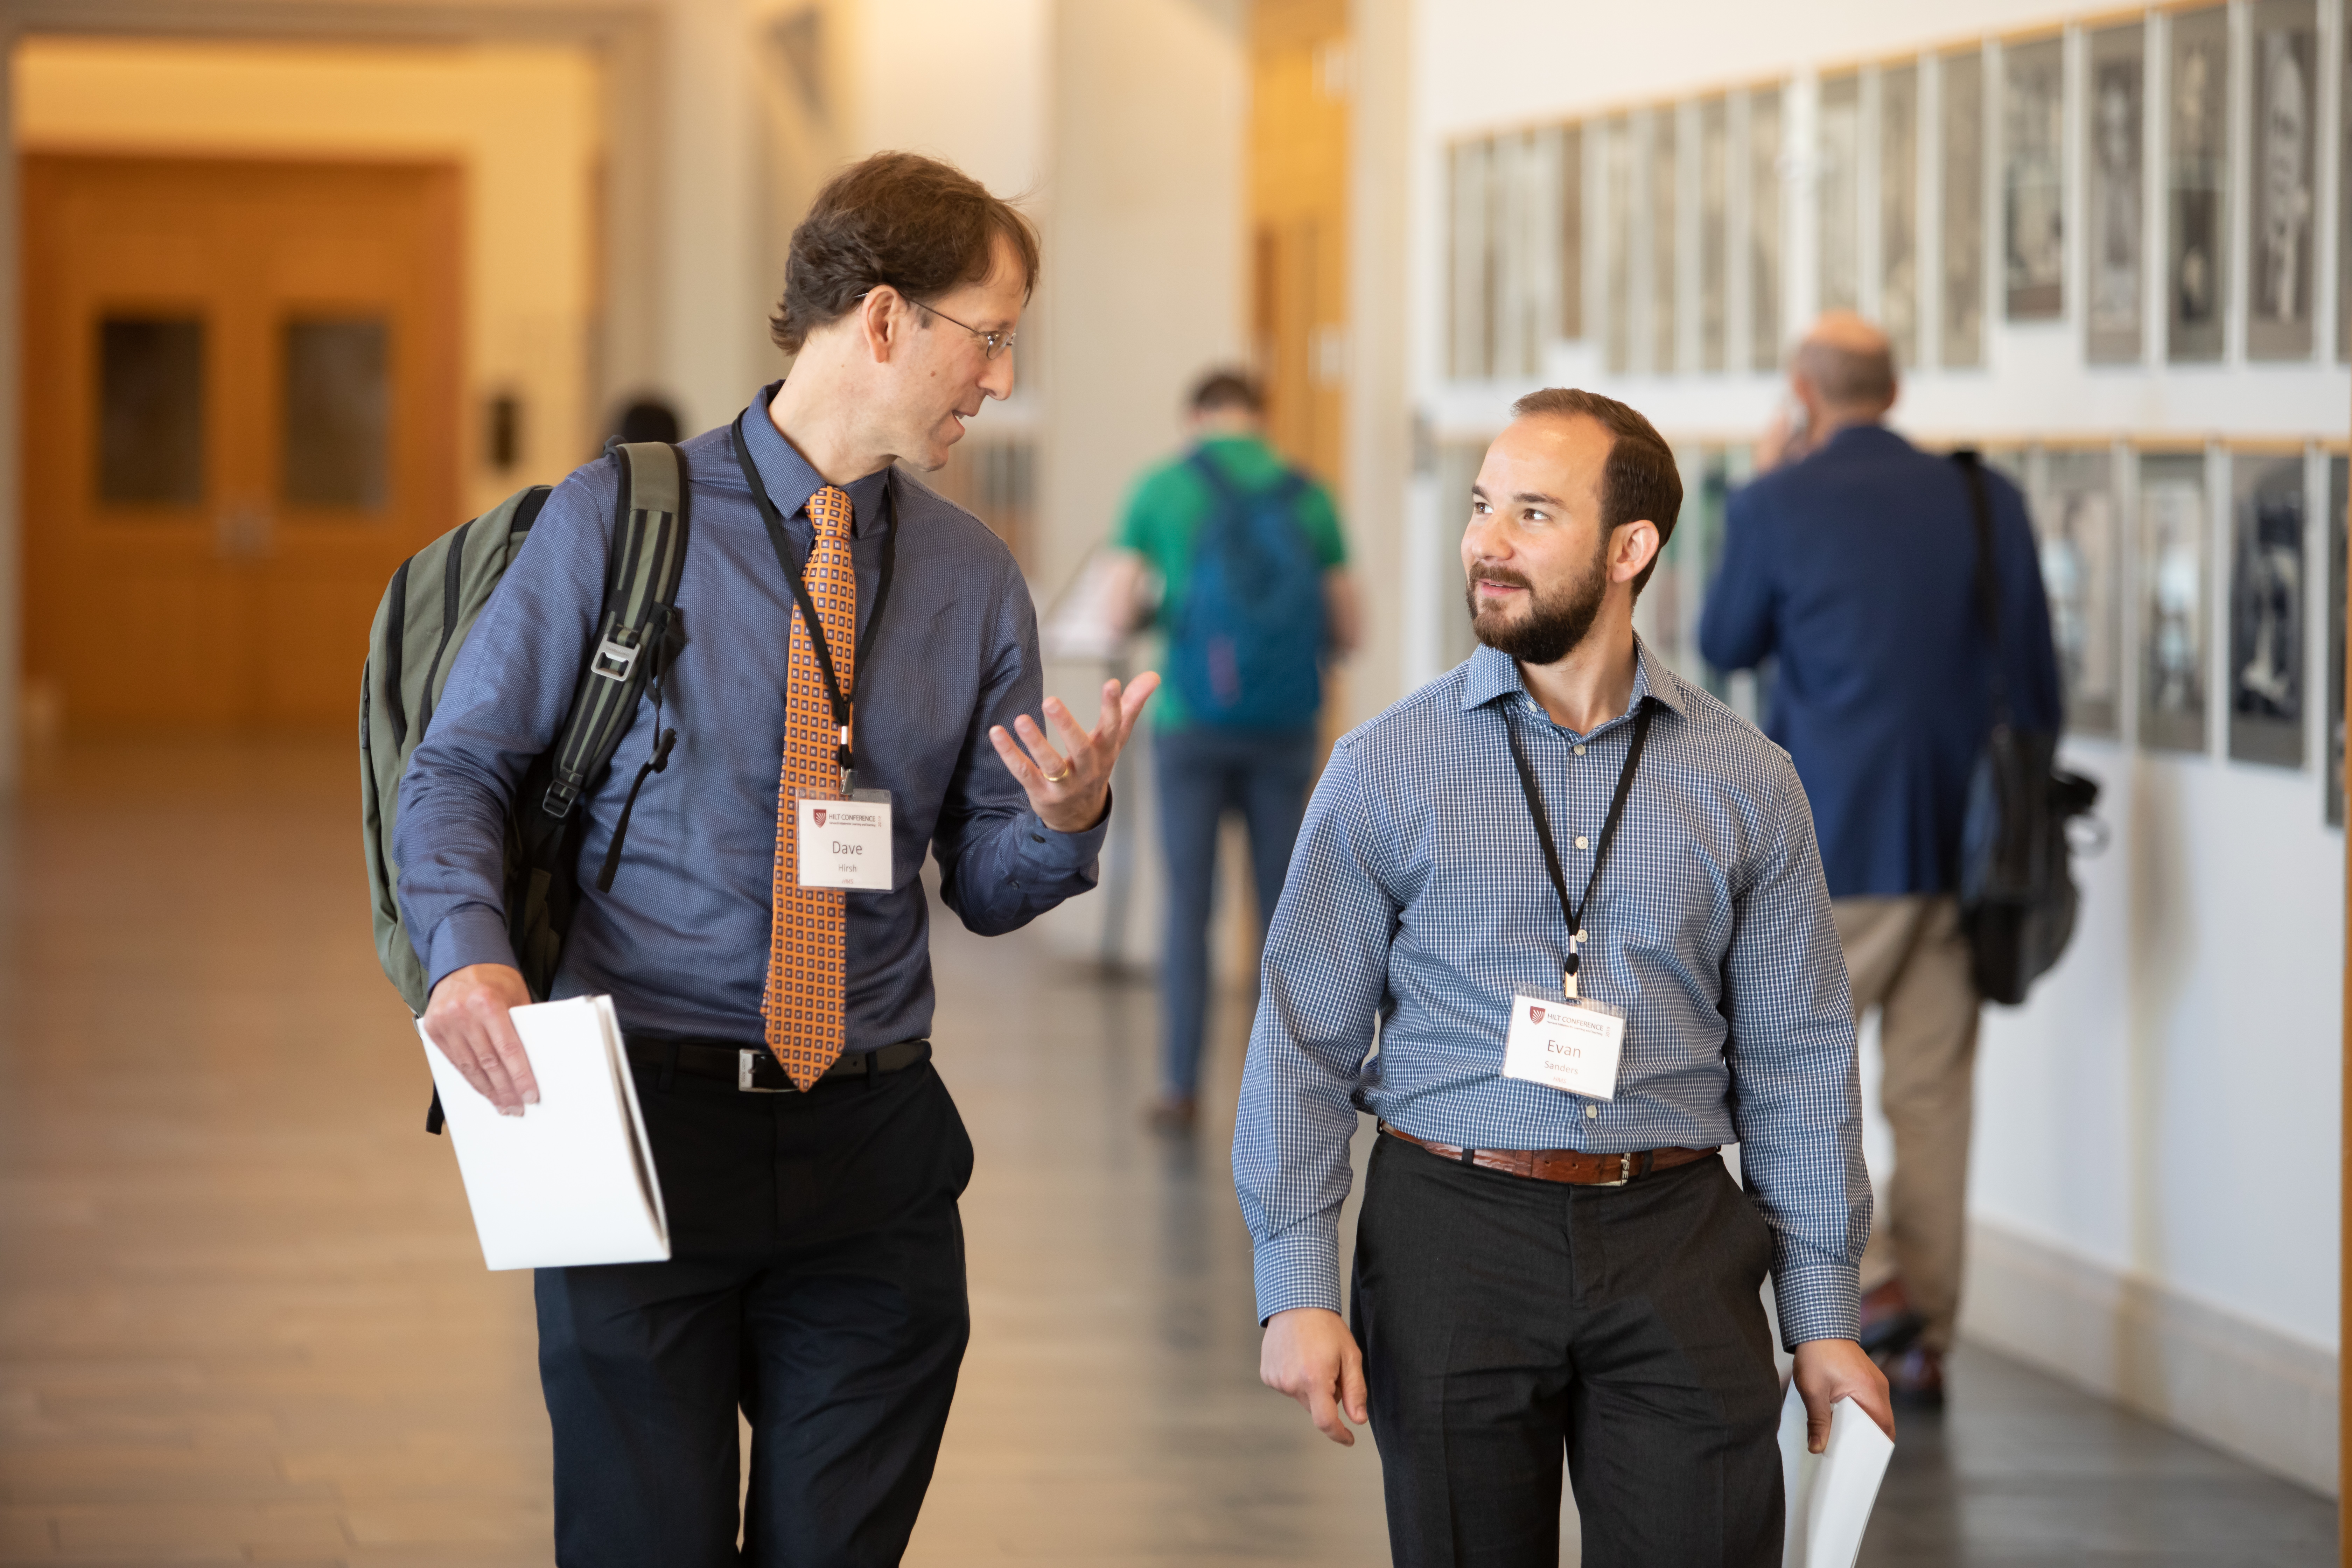 Two conference attendees walk while in conversation